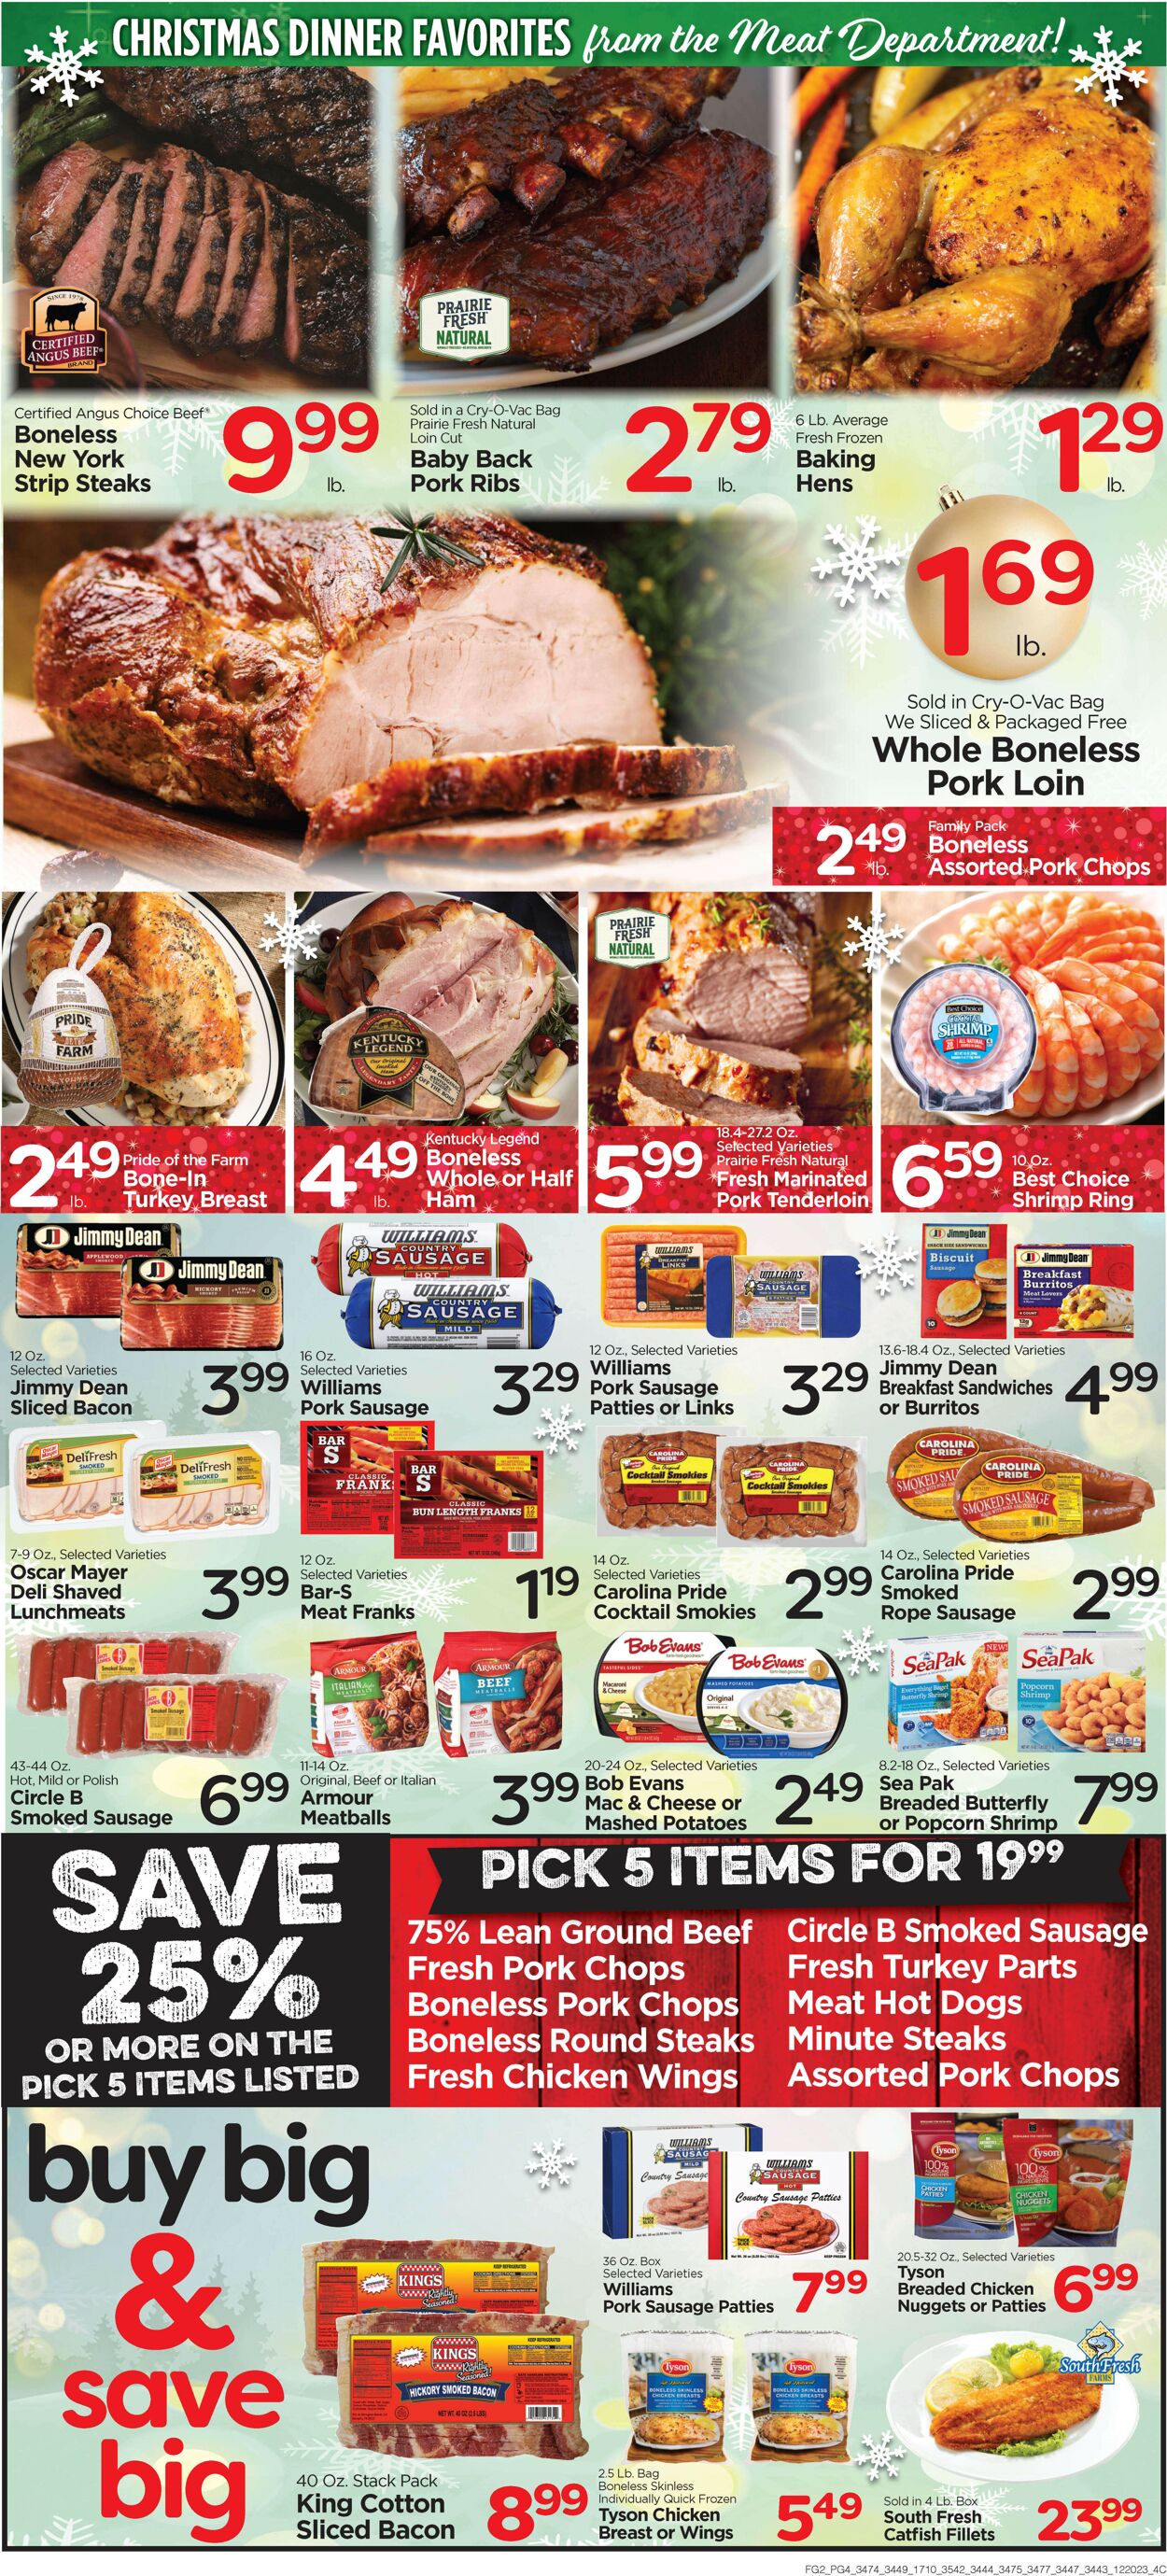 Catalogue Edwards Food Giant from 12/20/2023